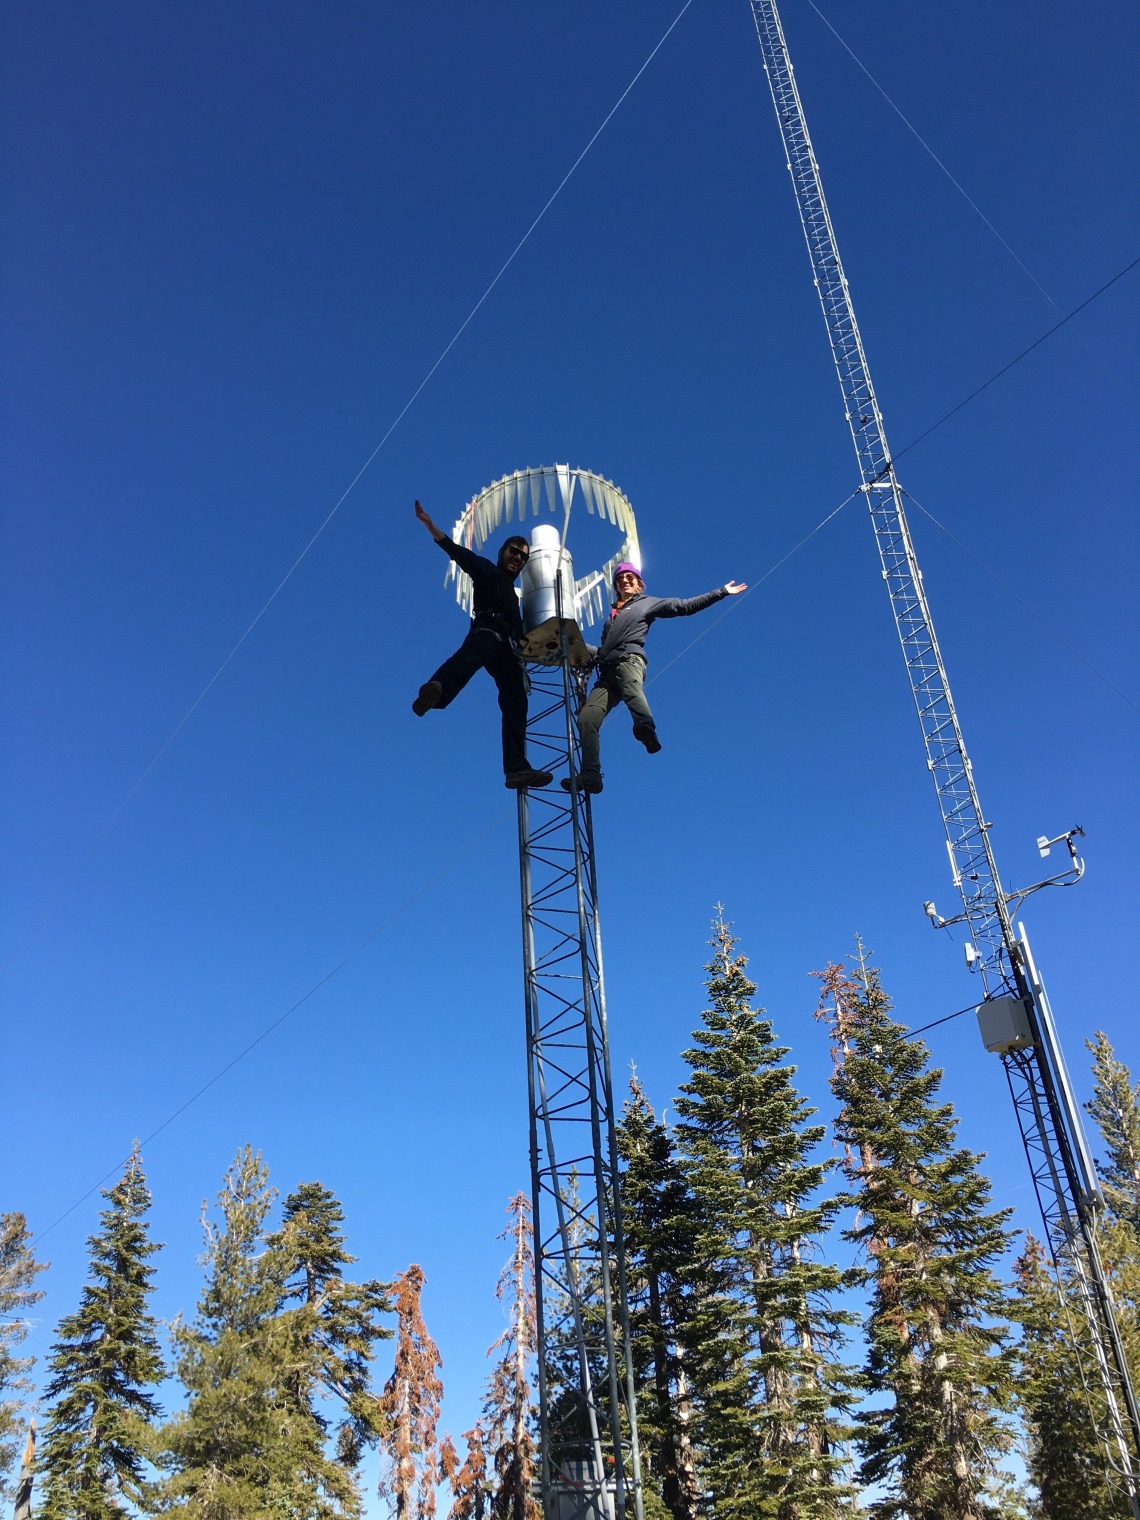 Josh Sturtevant and another researcher on top of a tower holding research equipment